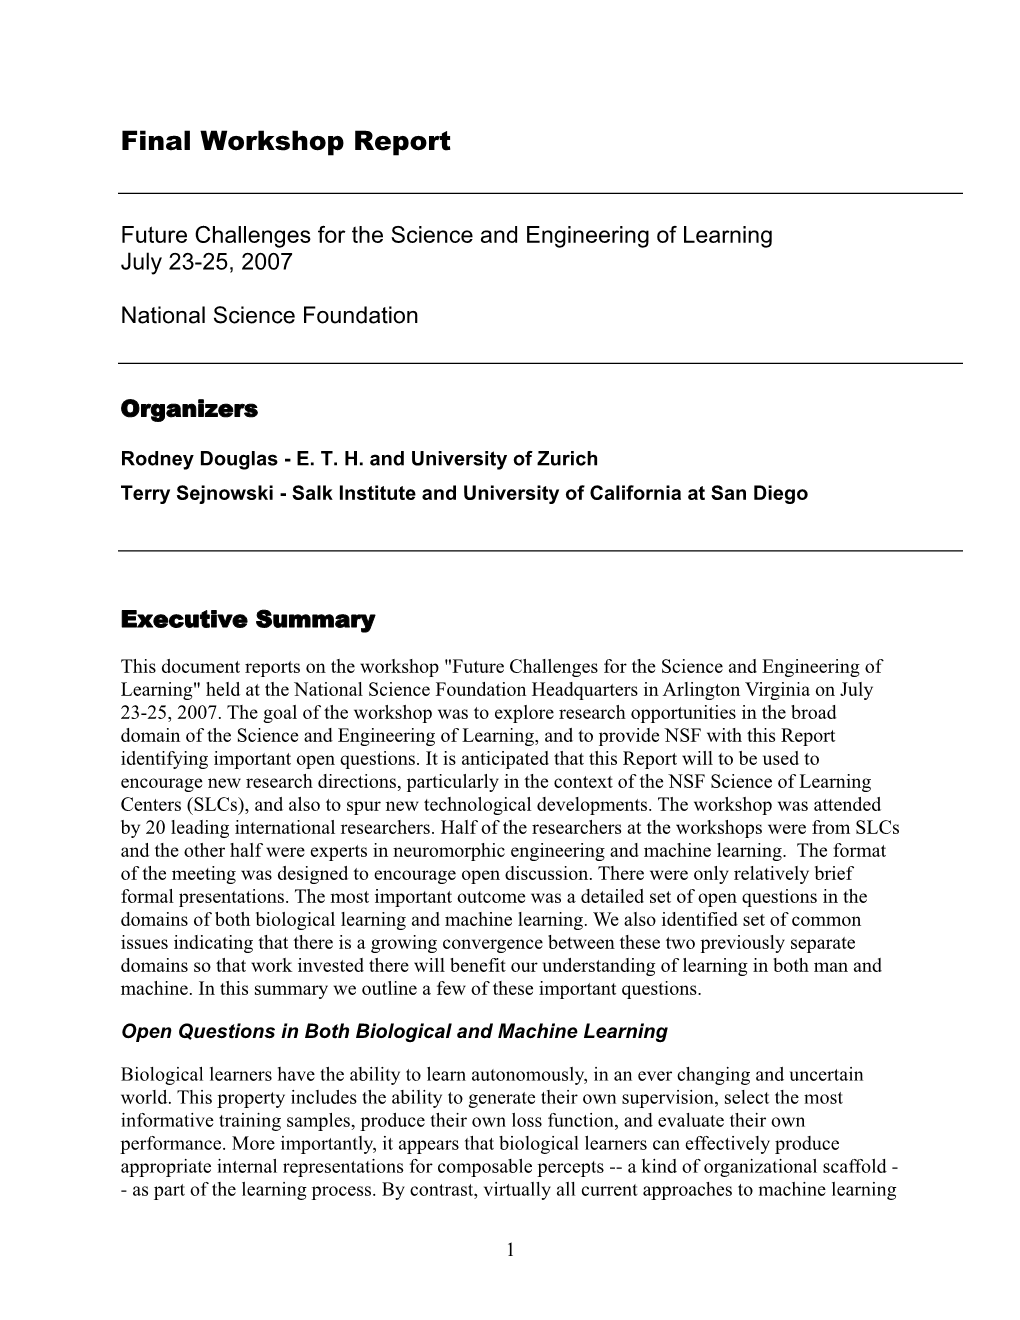 2007 NSF Workshop Report on the Science and Engineering of Learning